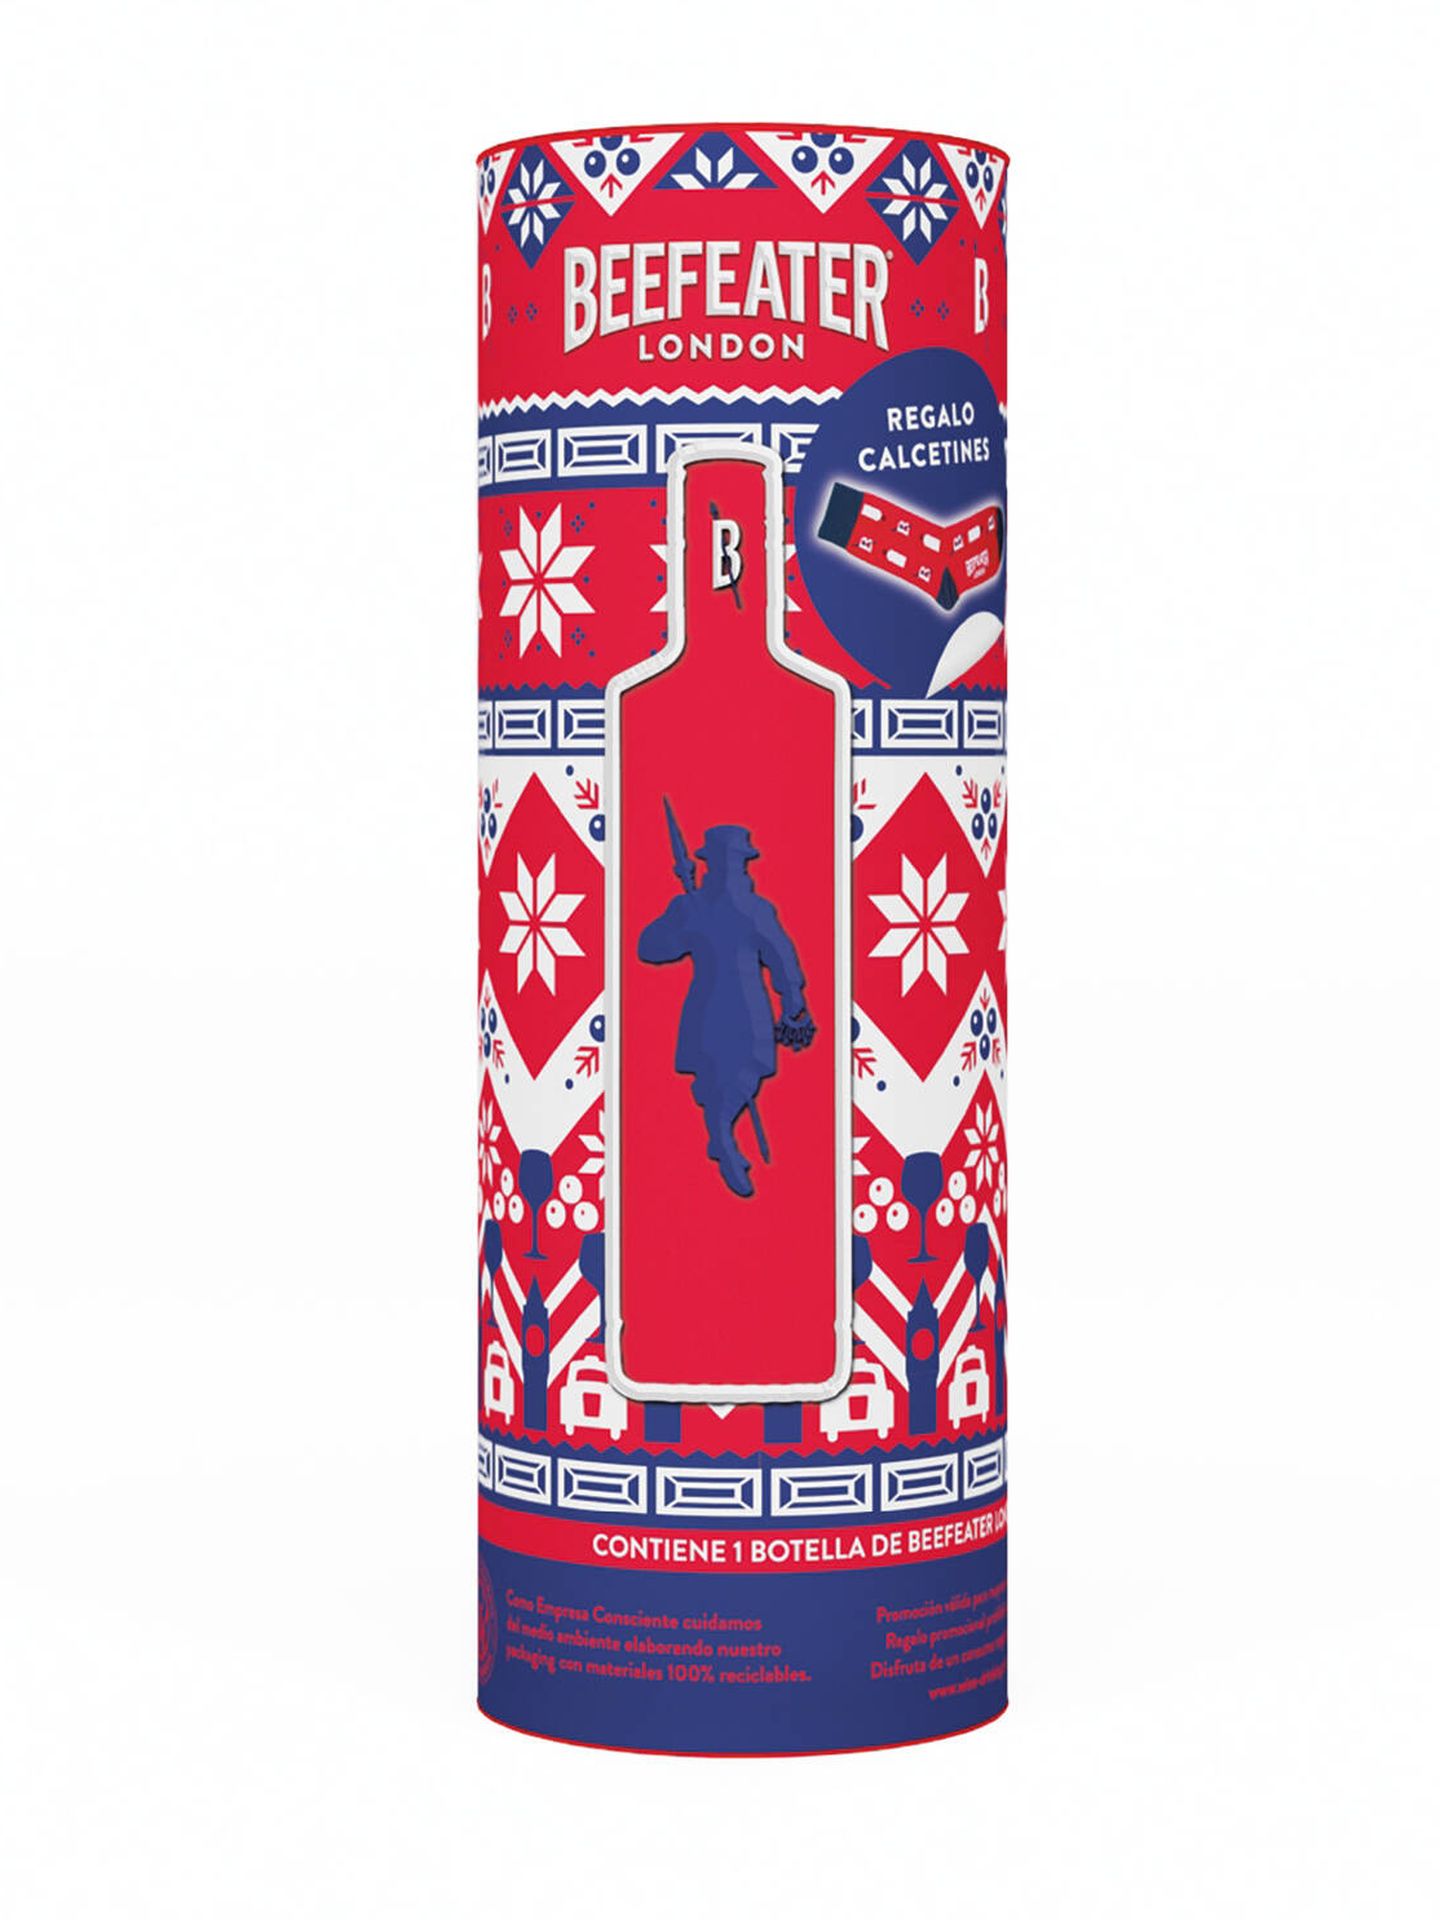 Foto: Beefeater.